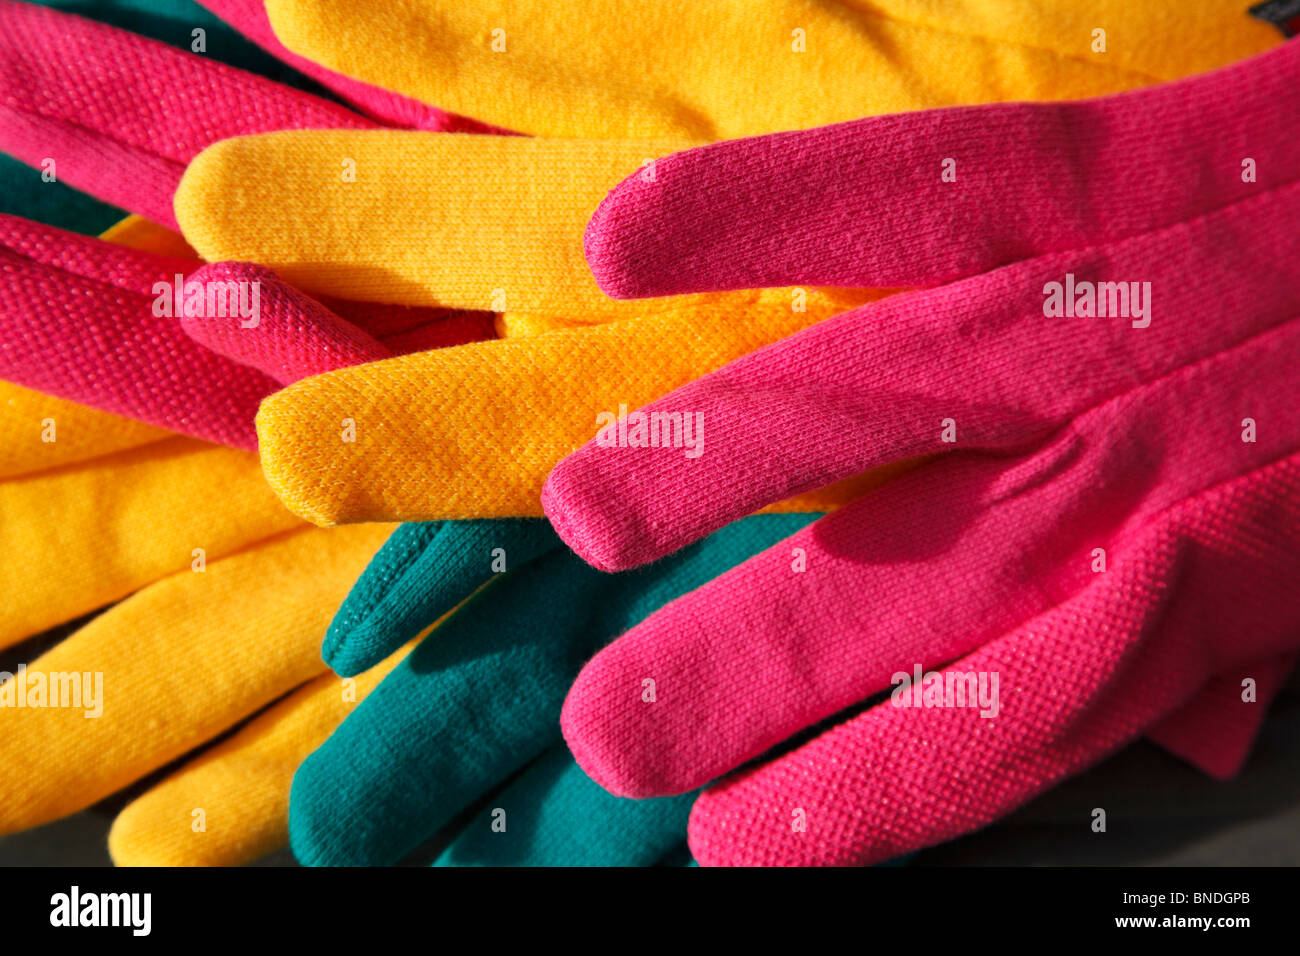 Coloured knitted gloves Stock Photo